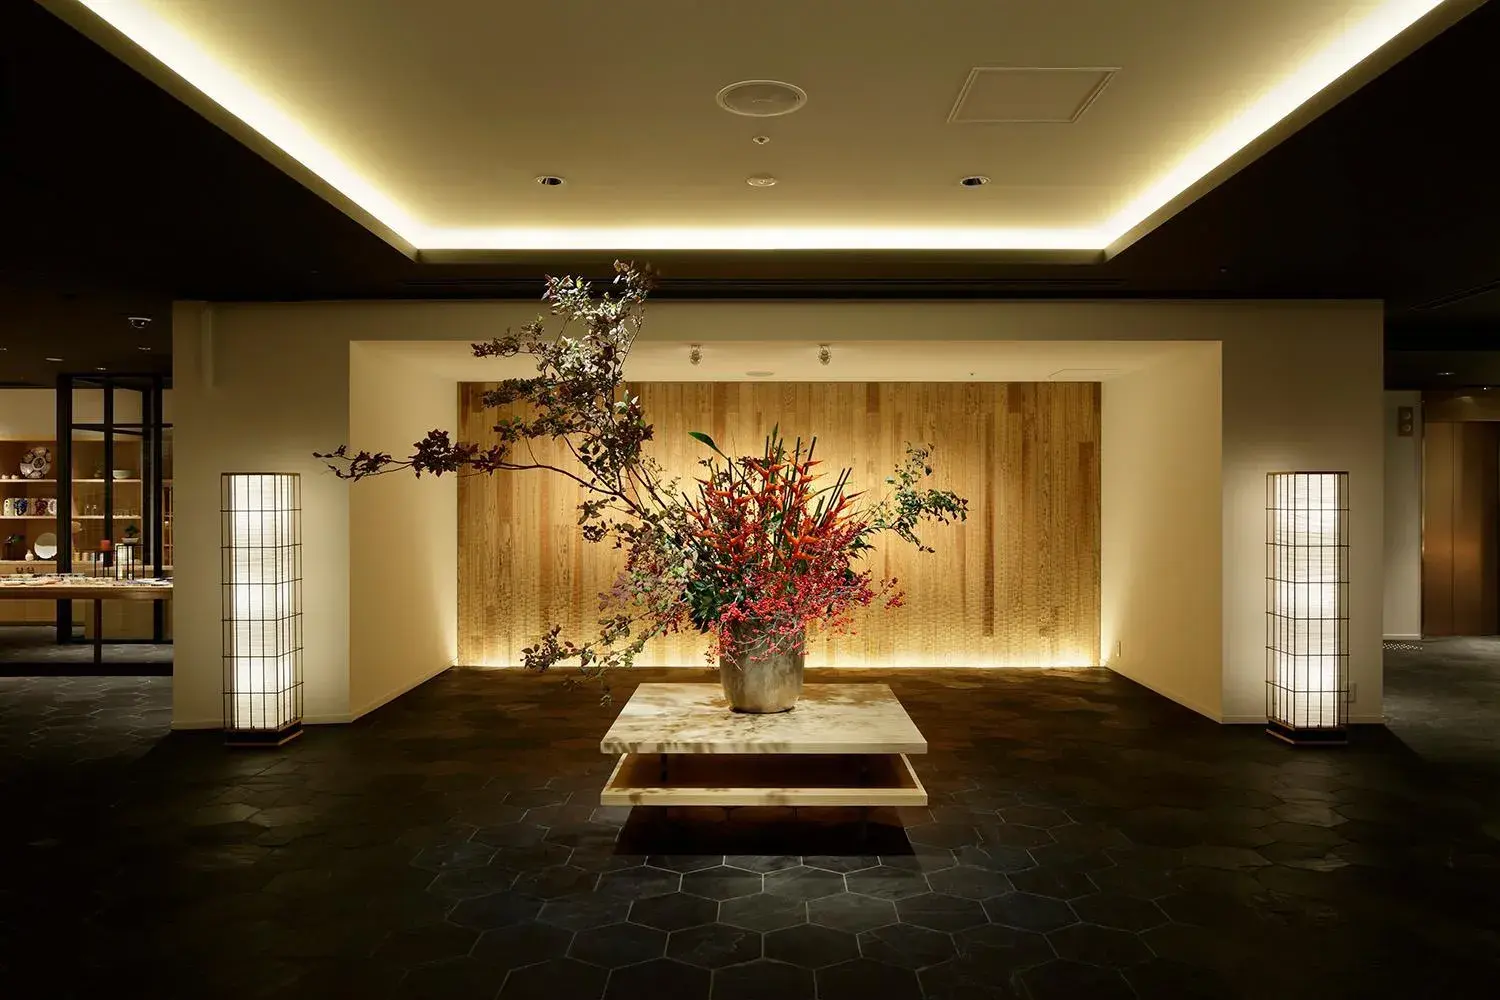 Lobby or reception in hotel kanra kyoto